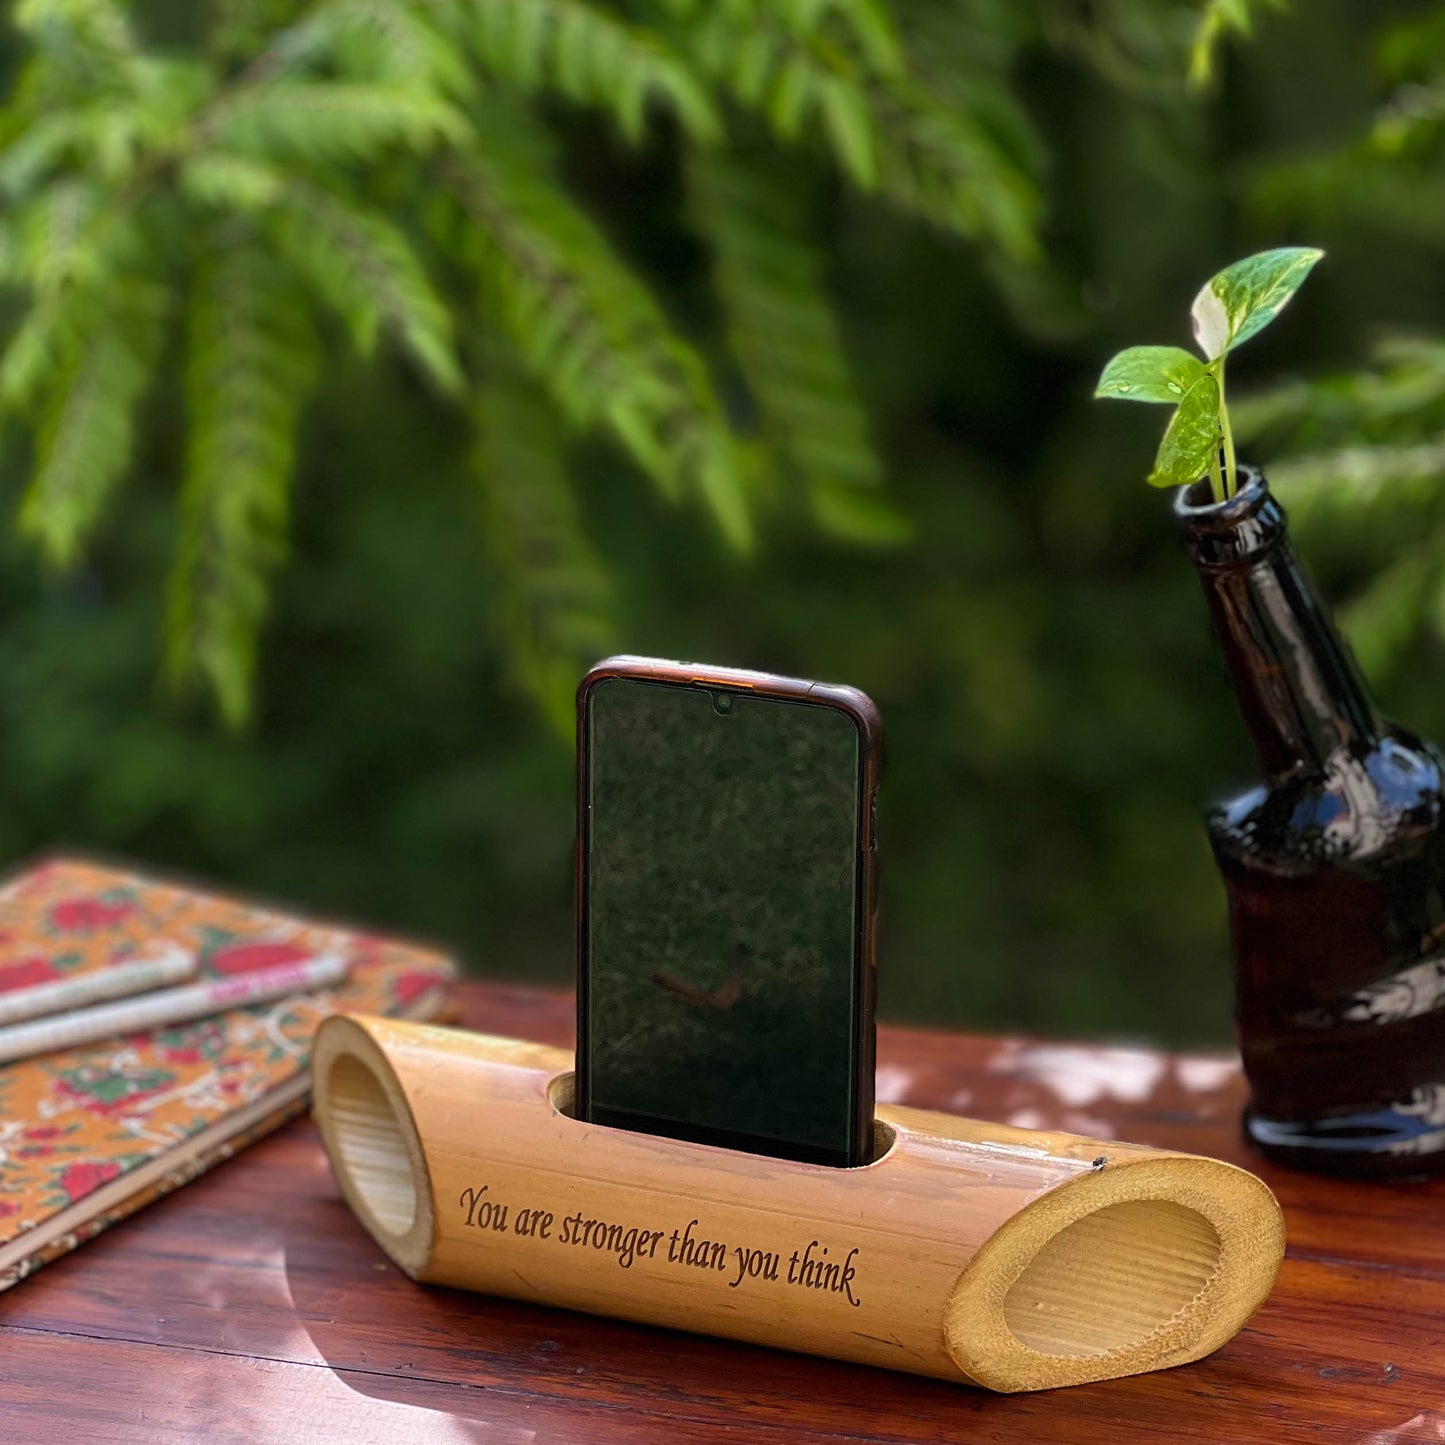 Bamboobeat sound amplifier | You Are Stronger Than You Think | Mobile Holder | Eco-friendly | Office Desk | Scrapshala